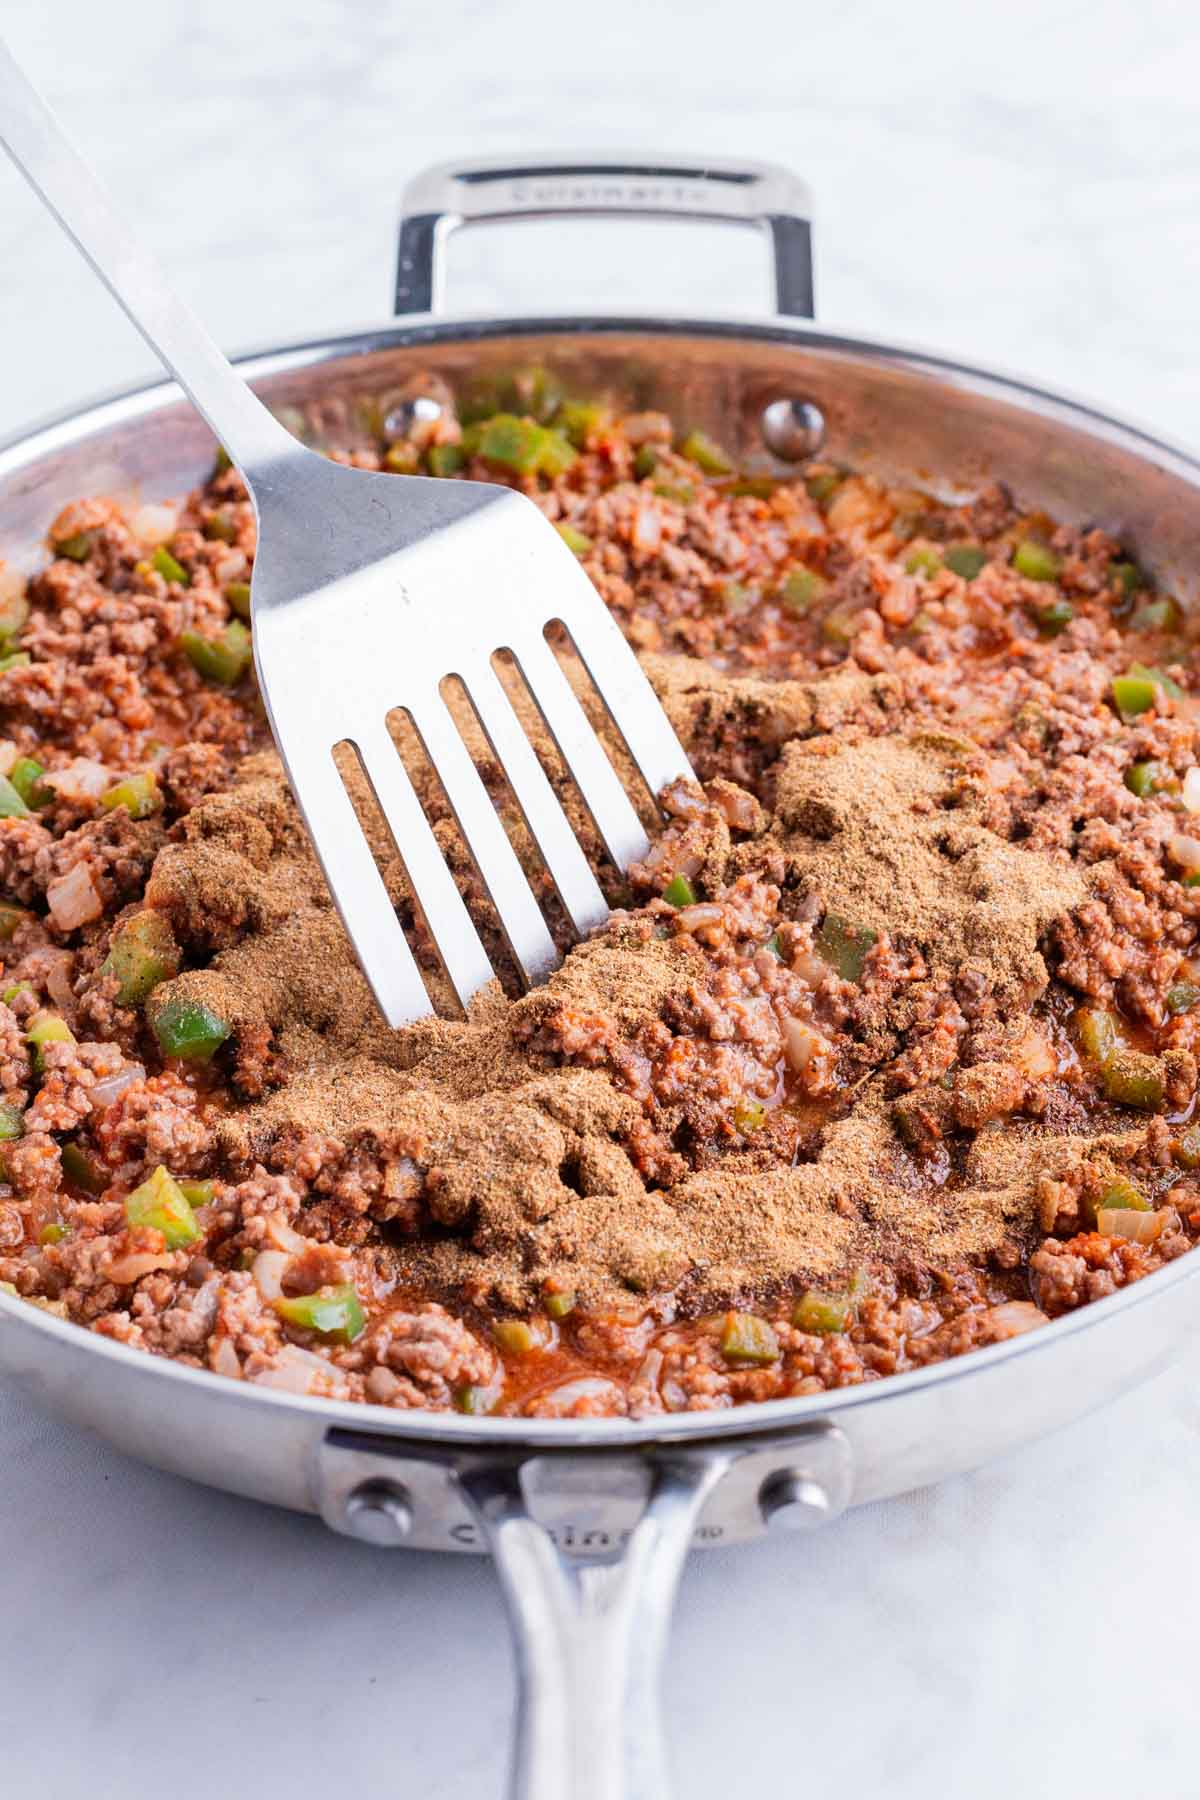 A spatula stirs spices into the meat for Mexican Lasagna.